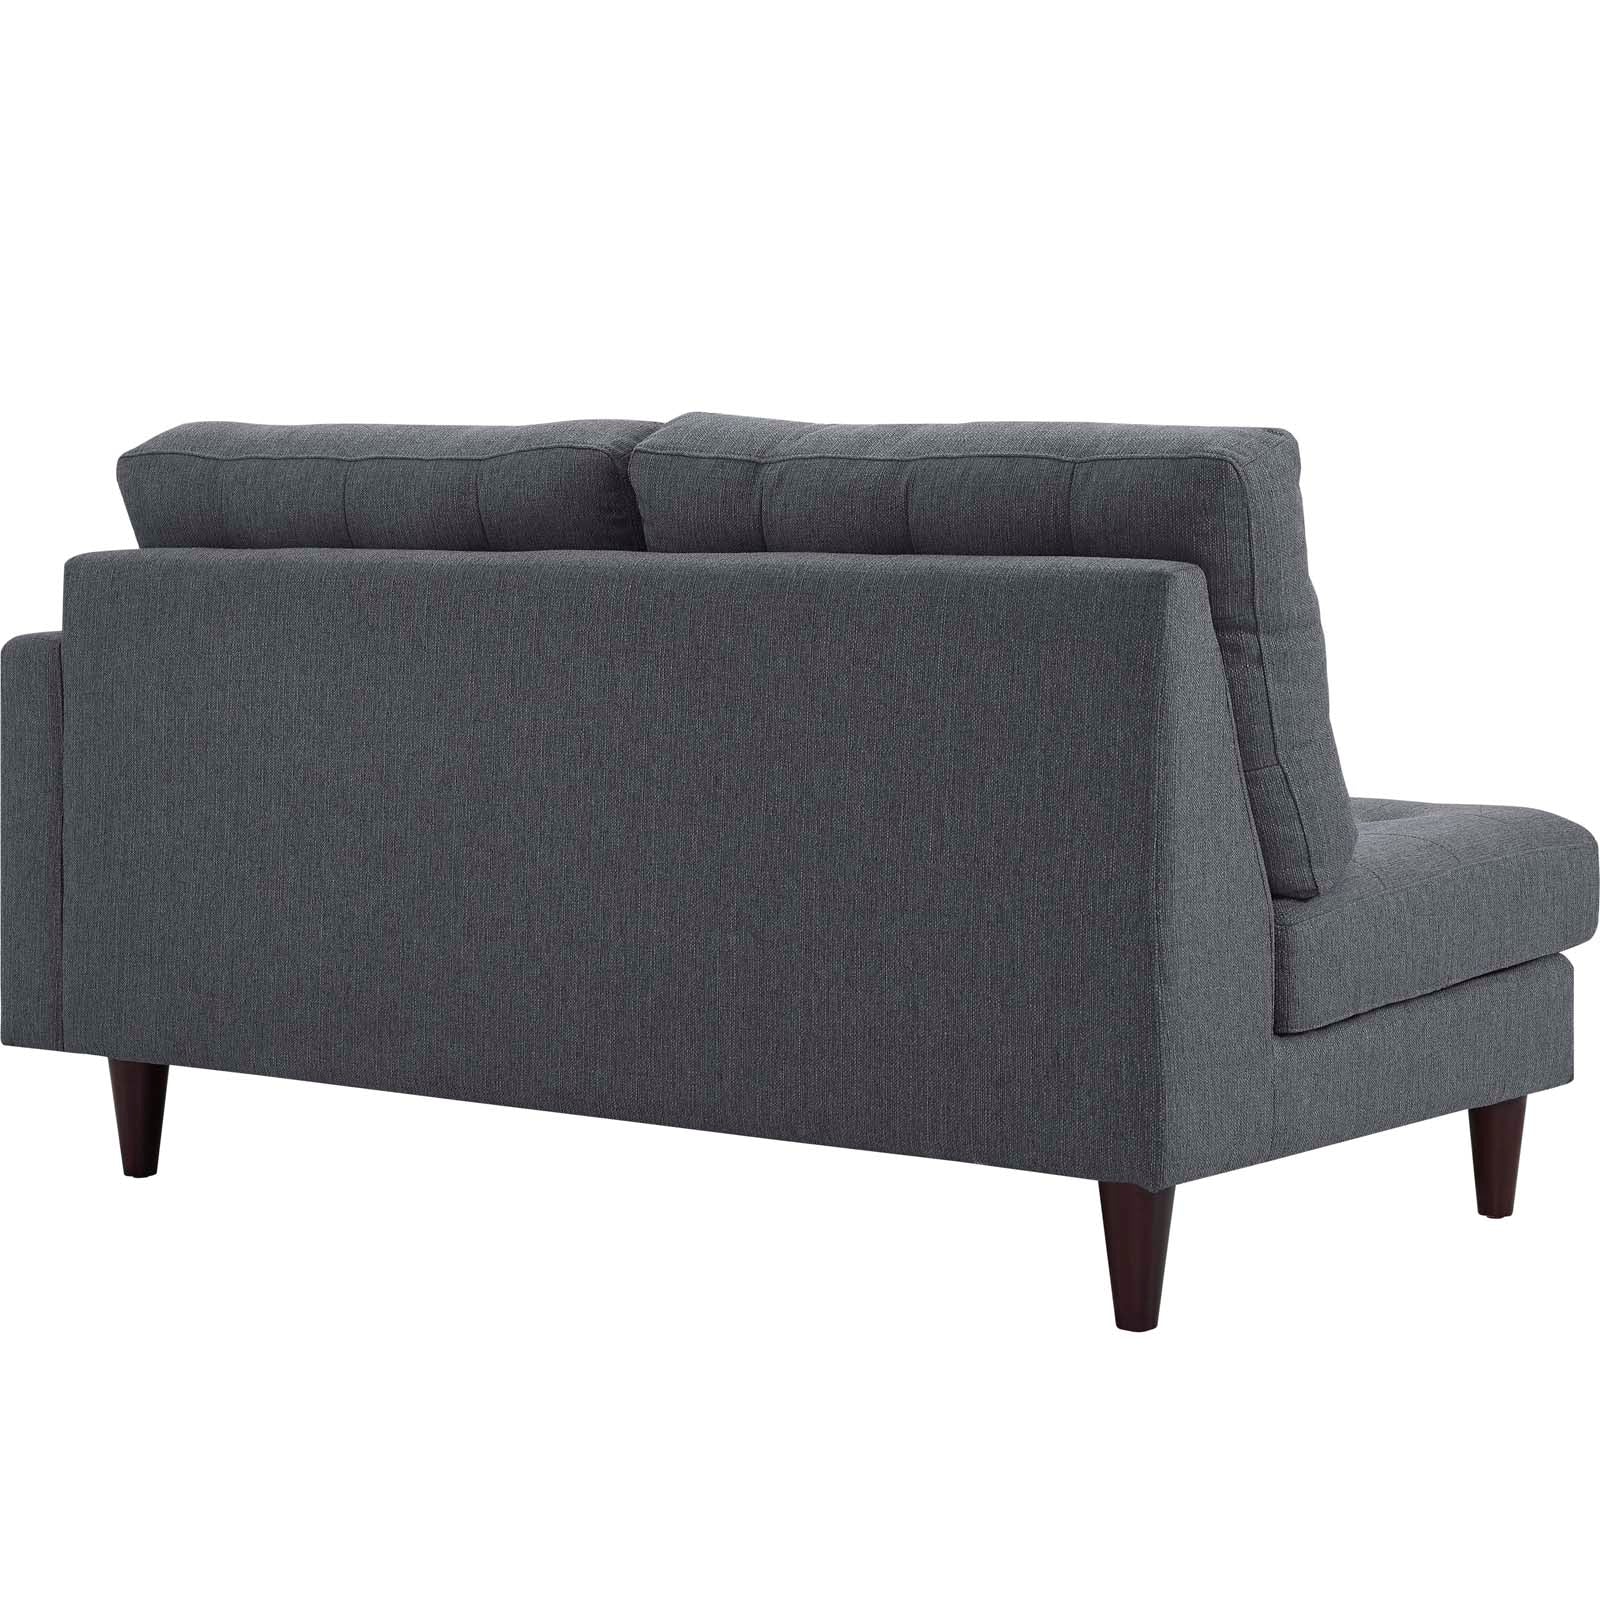 Modway Loveseats - Empress Right-Facing Upholstered Fabric Loveseat Gray